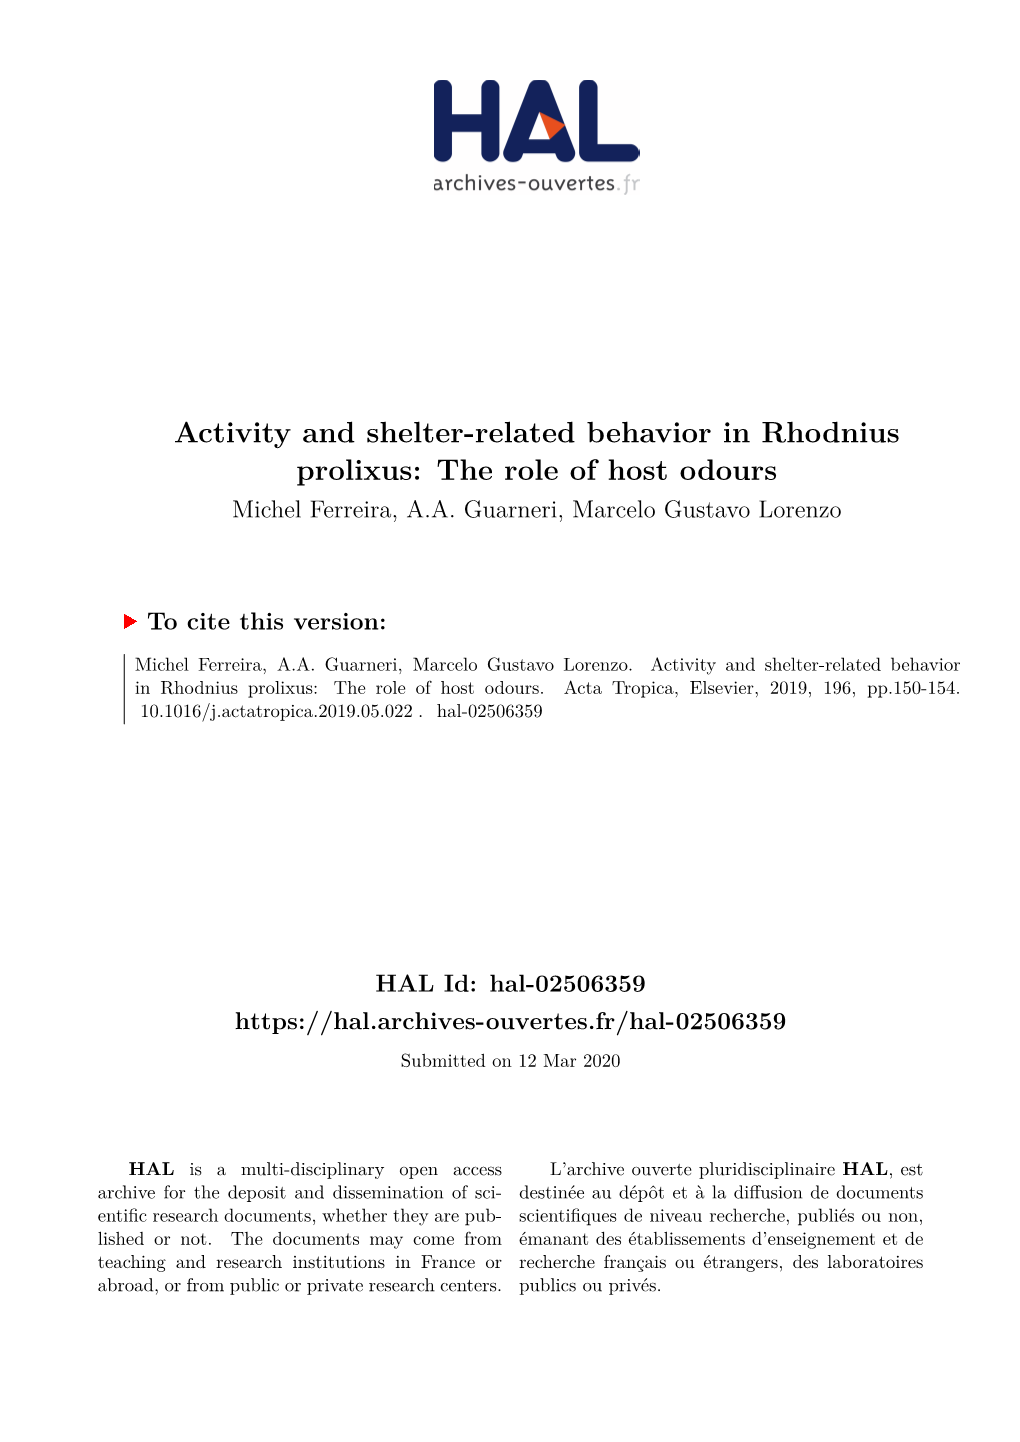 Activity and Shelter-Related Behavior in Rhodnius Prolixus: the Role of Host Odours Michel Ferreira, A.A